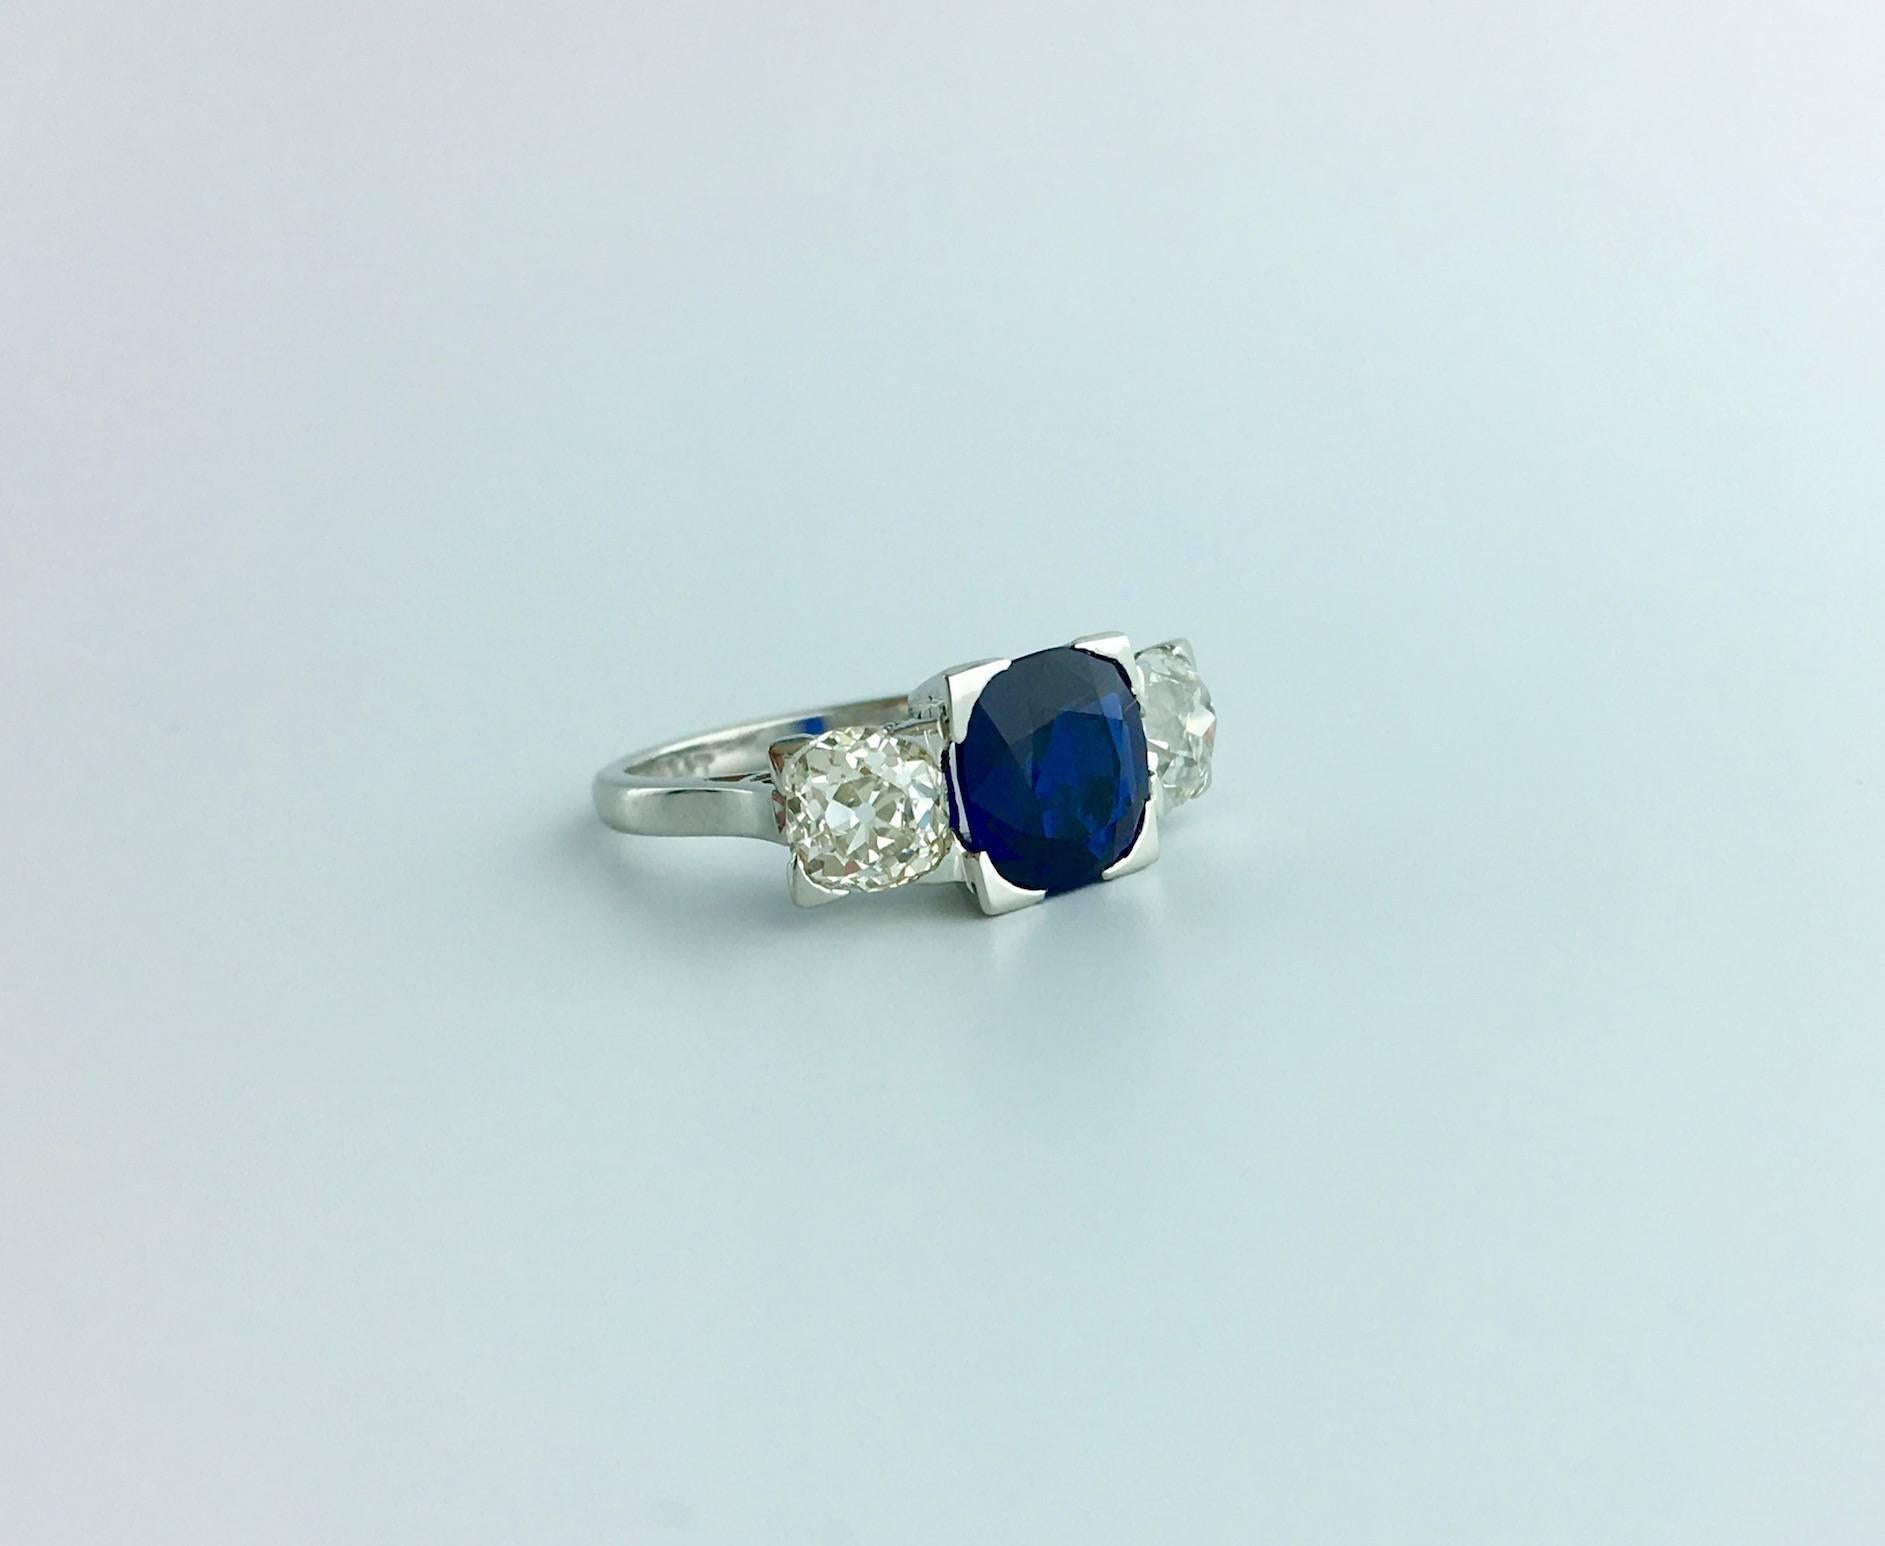 Elegant Natural Blue Sapphire weighting approximately 2.00 carats sided by two Old mine cut Diamonds (approximately 1.00 carat) mounted on platinum.
Circa 1920.

Gross weight: 5.69 grams